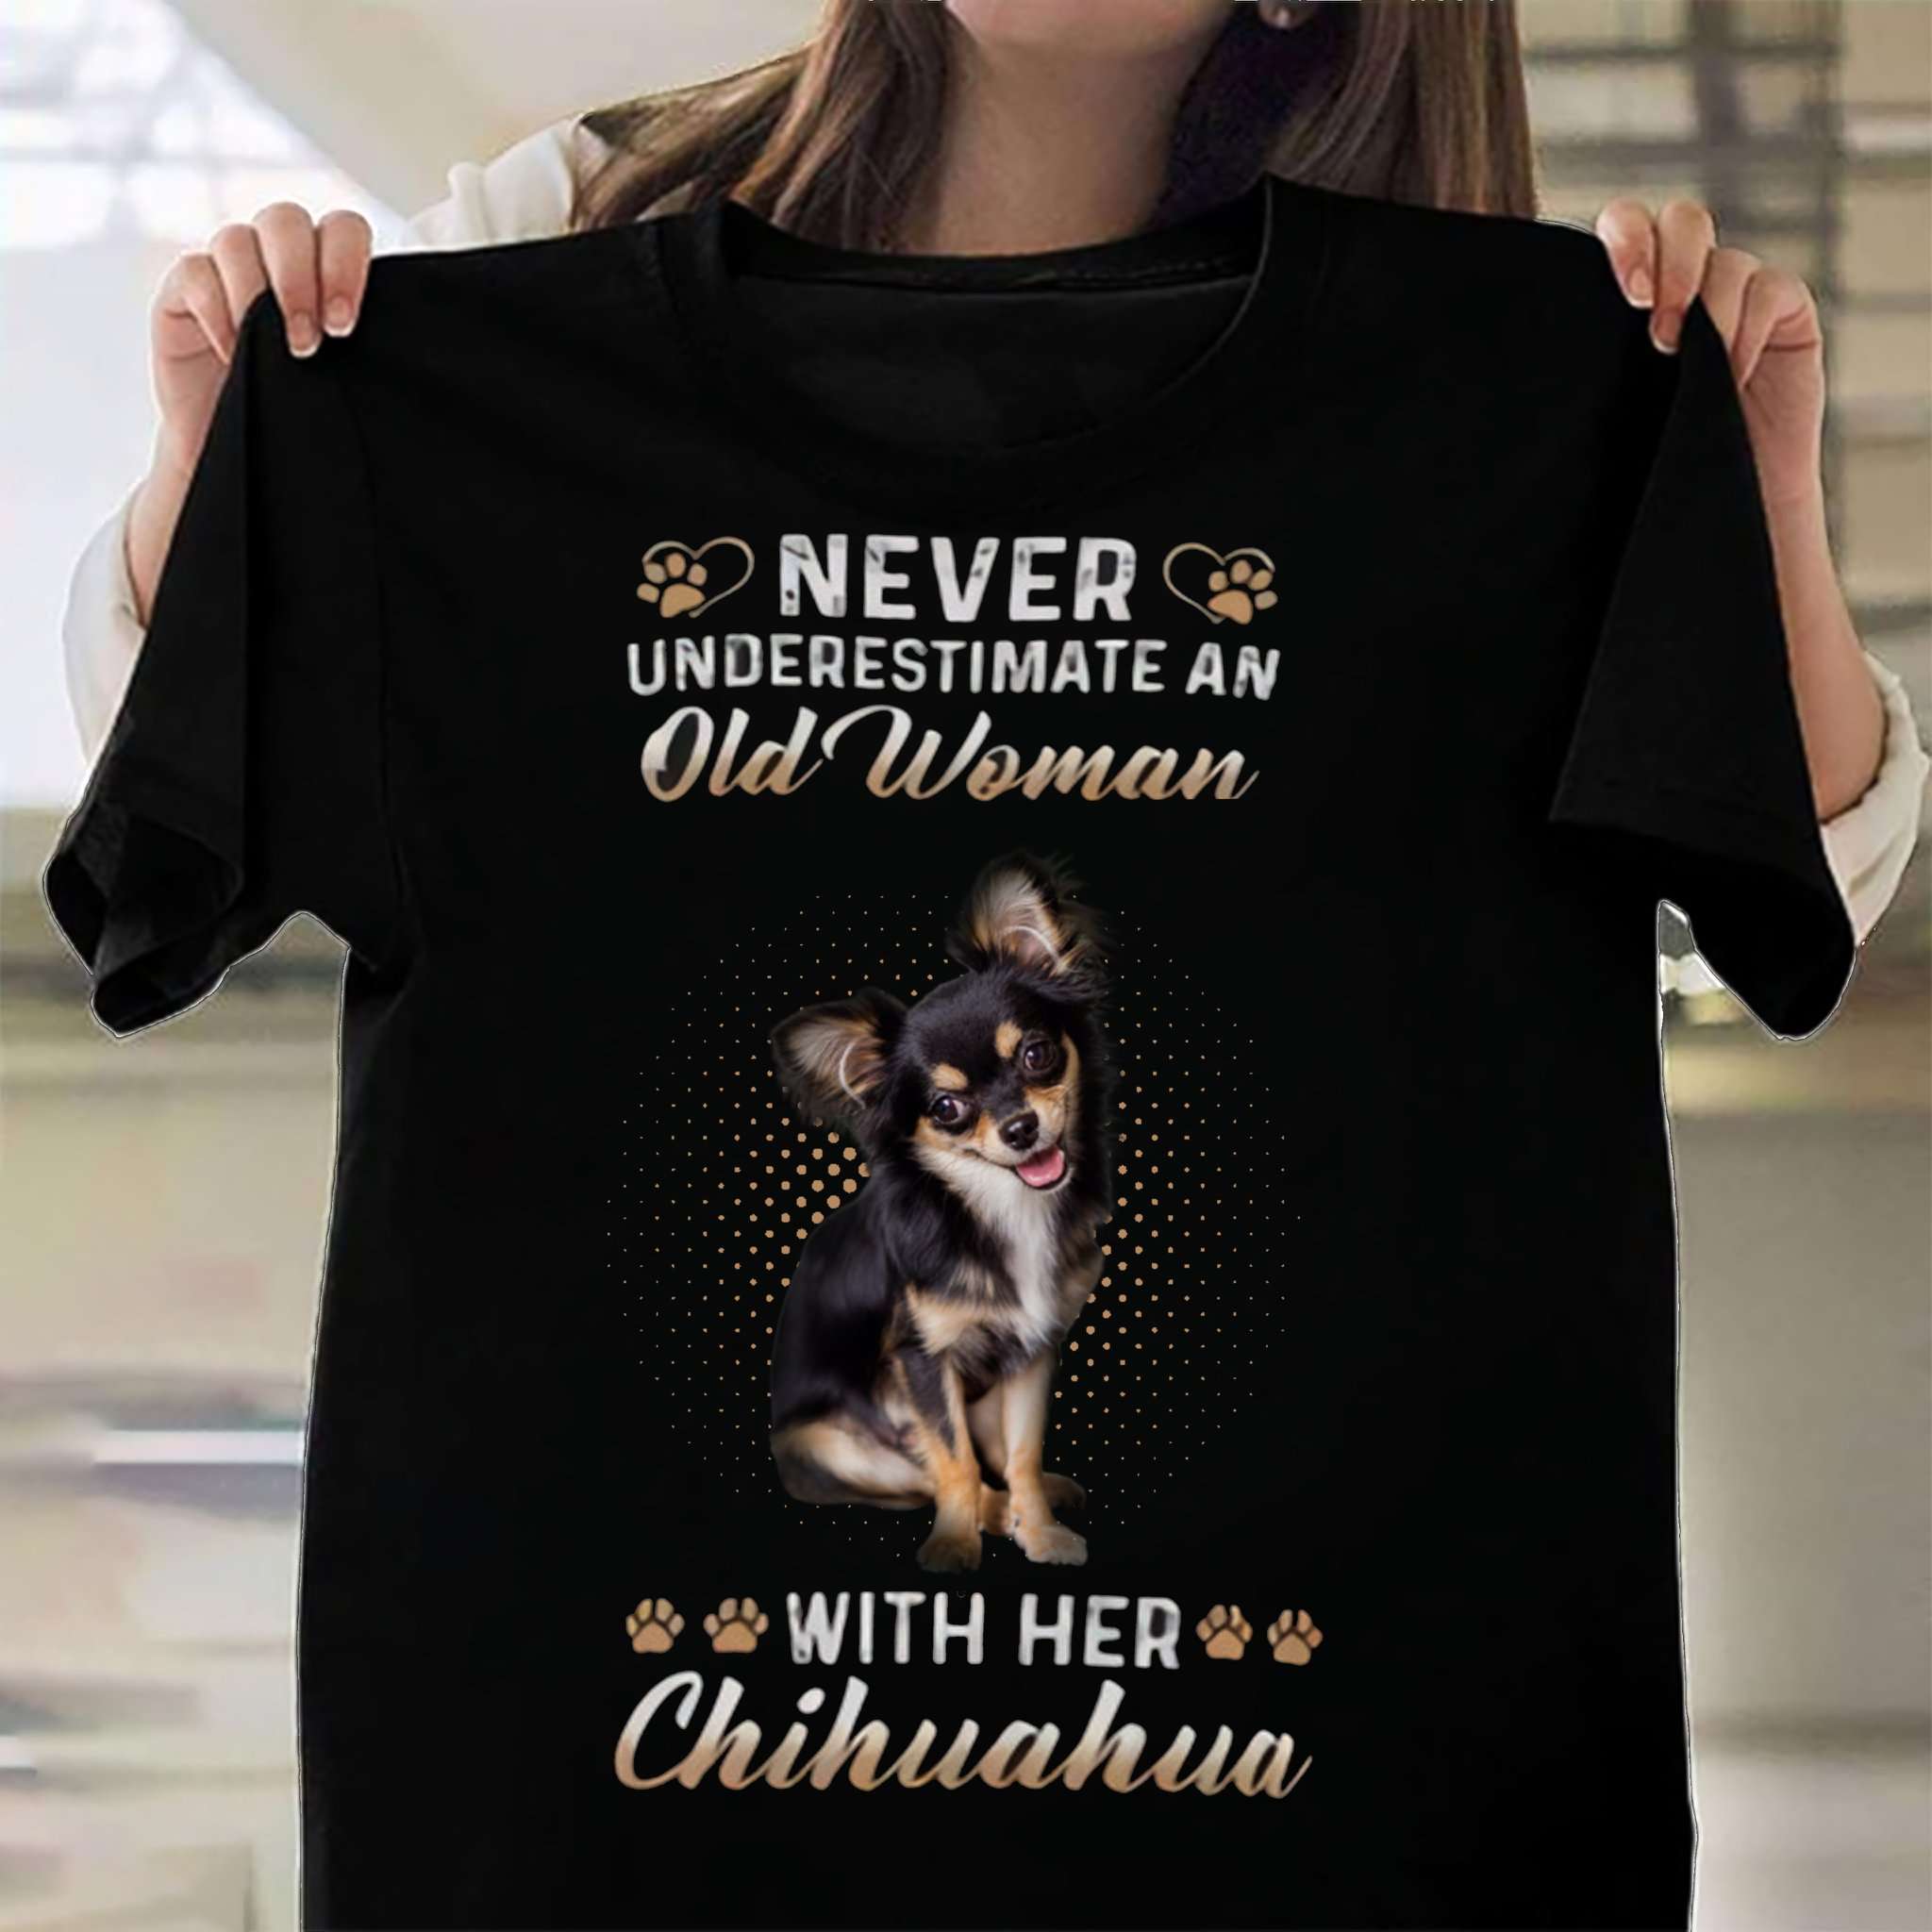 Never underestimate an old woman with her Chihuahua - Chihuahua lover, old man loves chihuahua